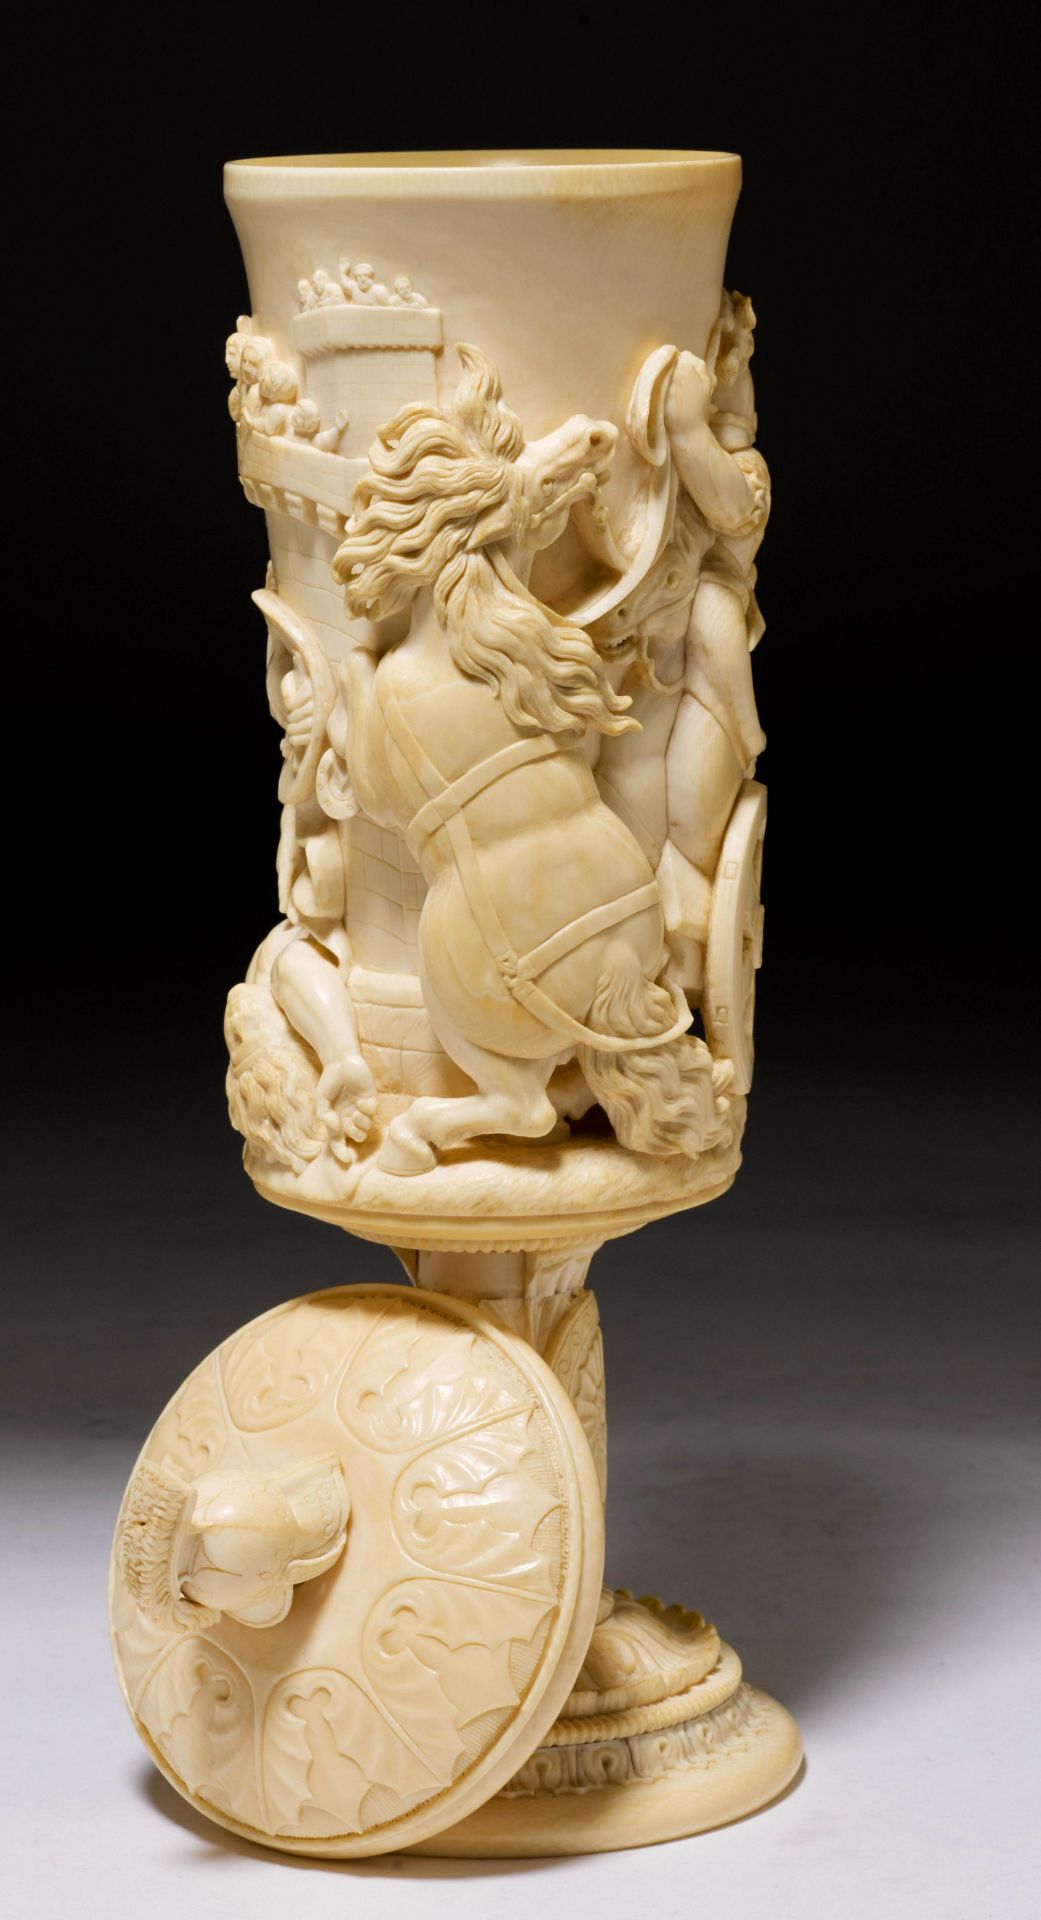 LIDDED GOBLET WITH A BATTLE SCENE FROM ANTIQUITY - Image 3 of 3